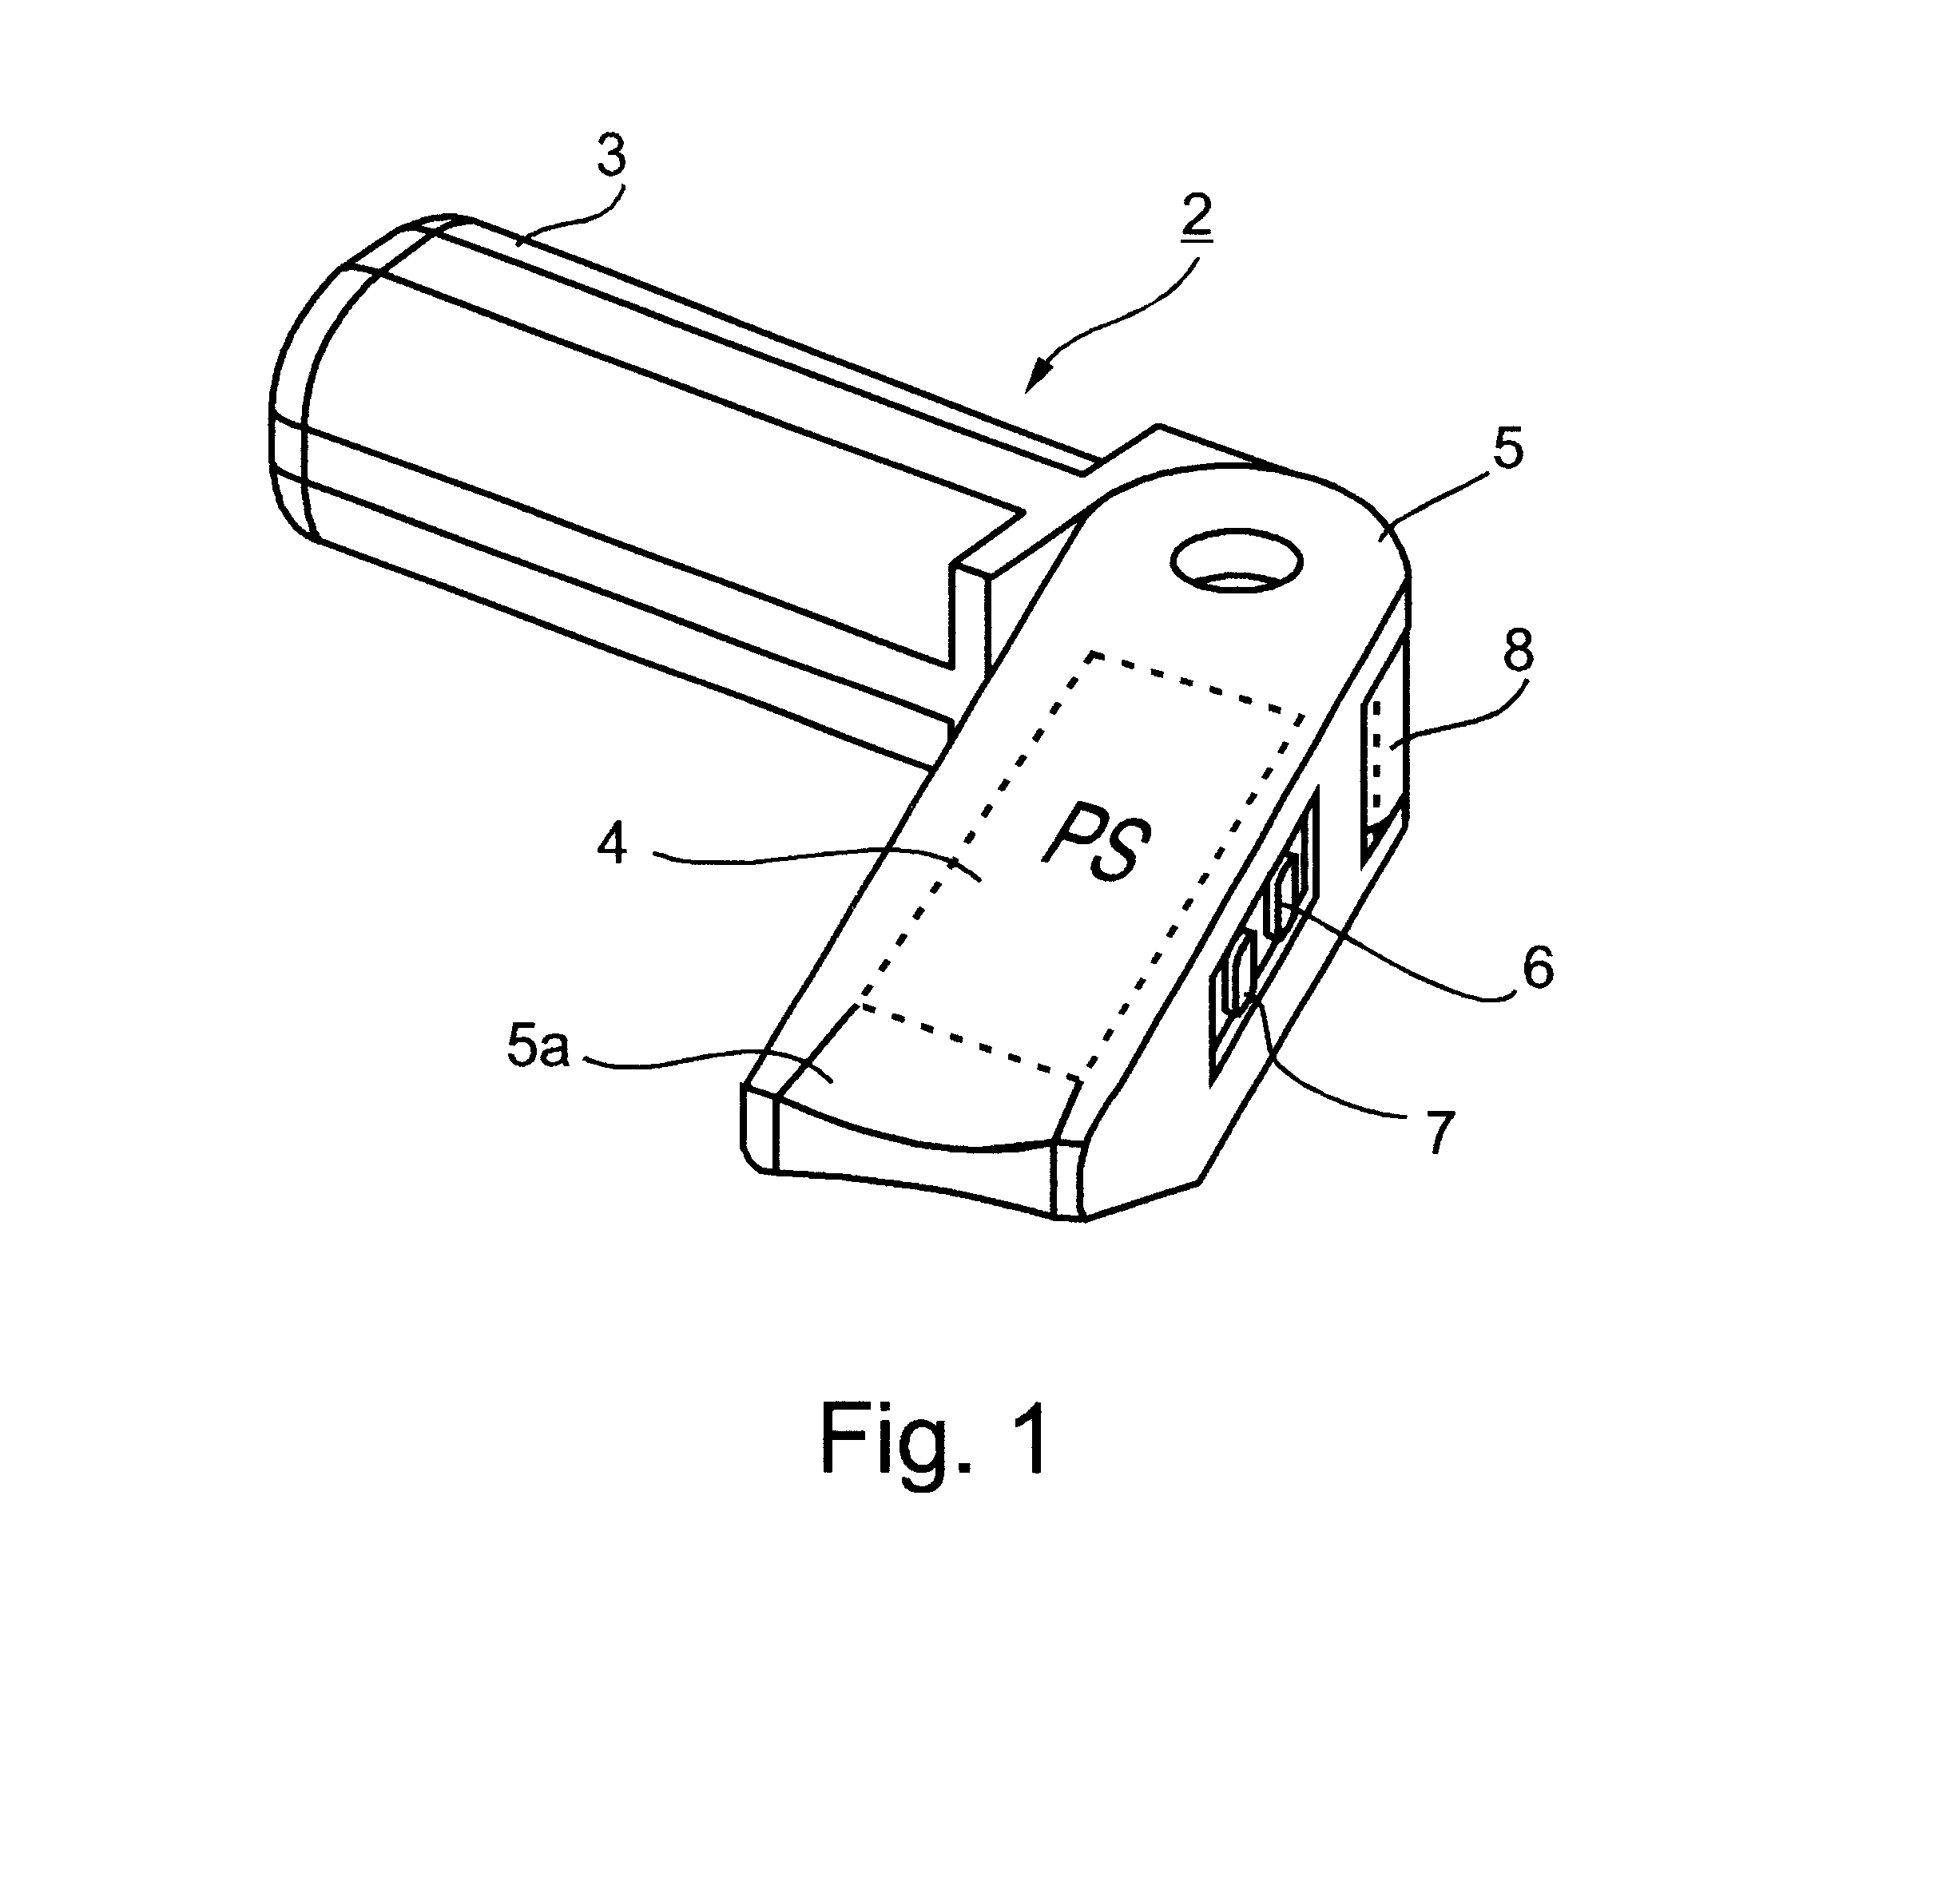 Contour mapping system and method particularly useful as a spine analyzer and probe therefor